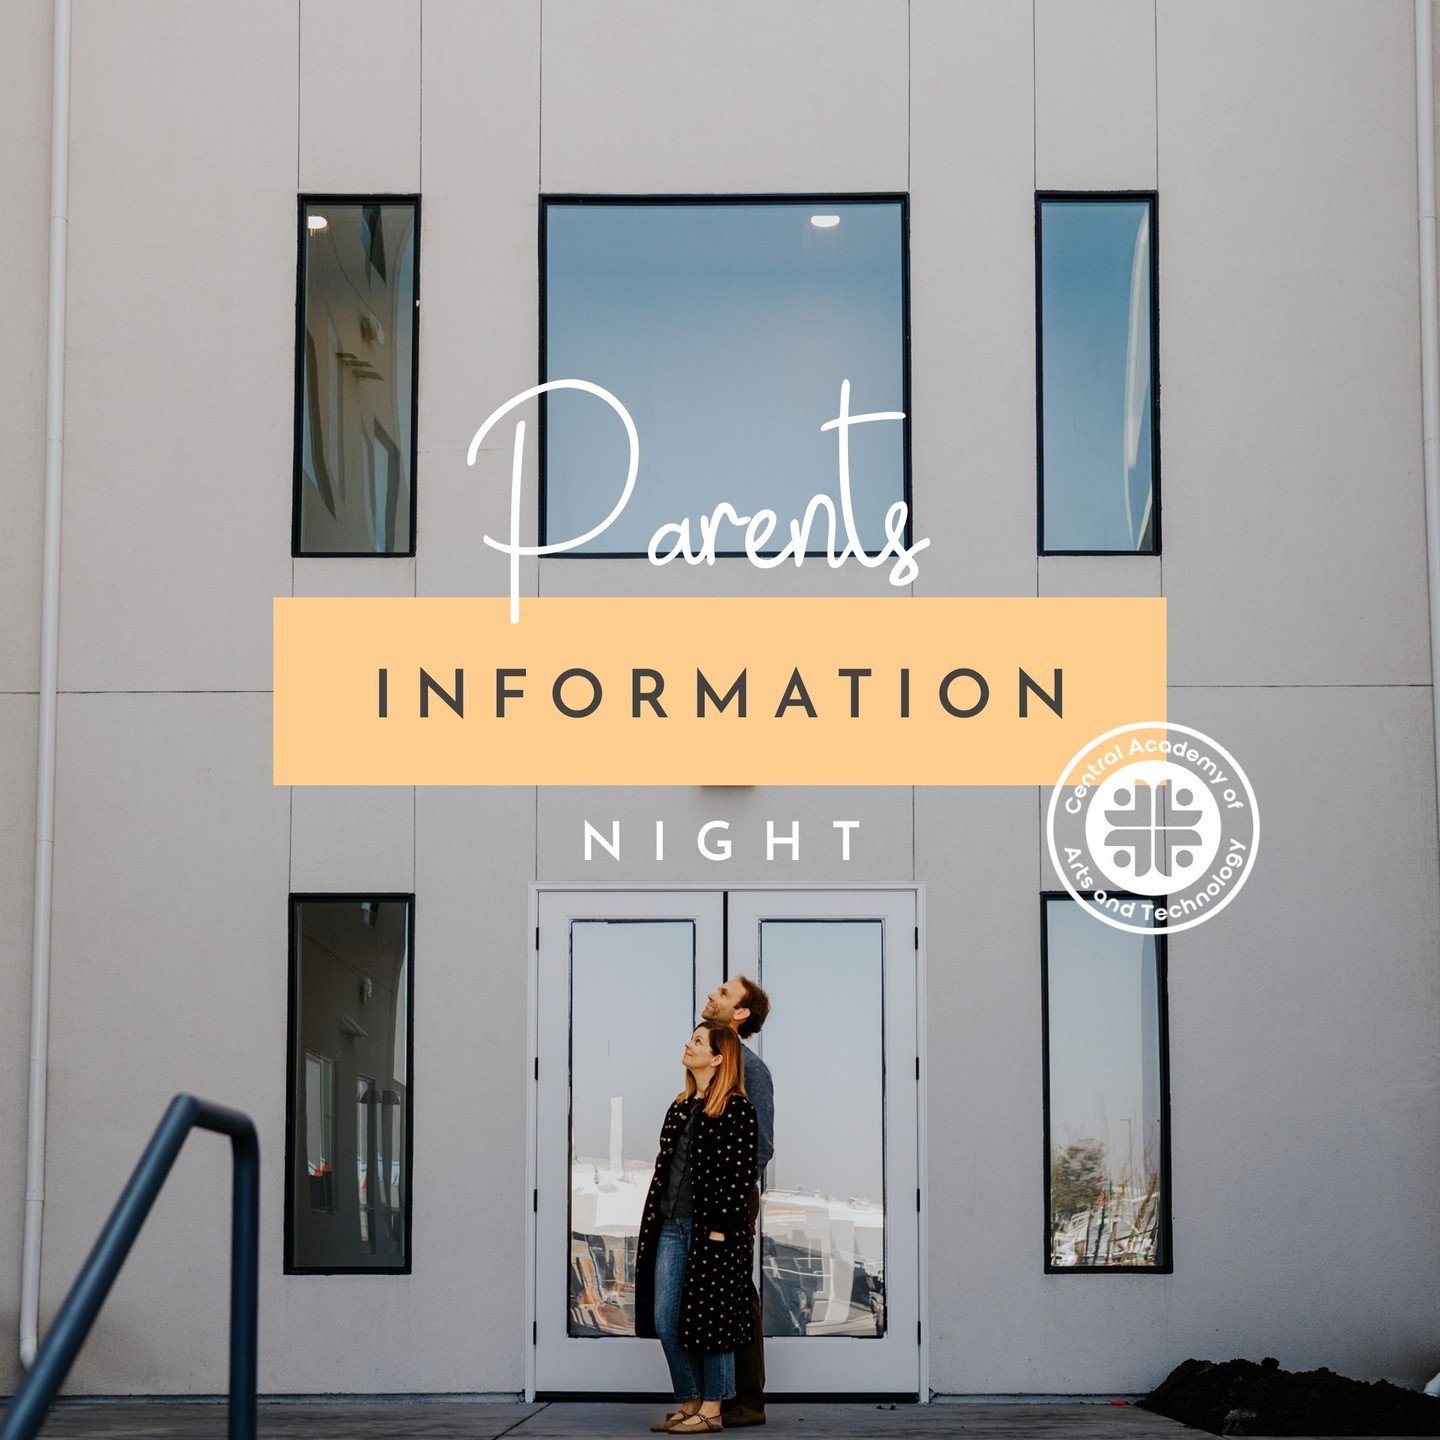 Join us at The Cue this Friday evening at 6:00pm, we're hosting a Parent's Information Night for Bakersfield for Central Academy of Arts and Technology (CAAT). Learn more about this innovative new charter school, ask questions, and engage with forwar